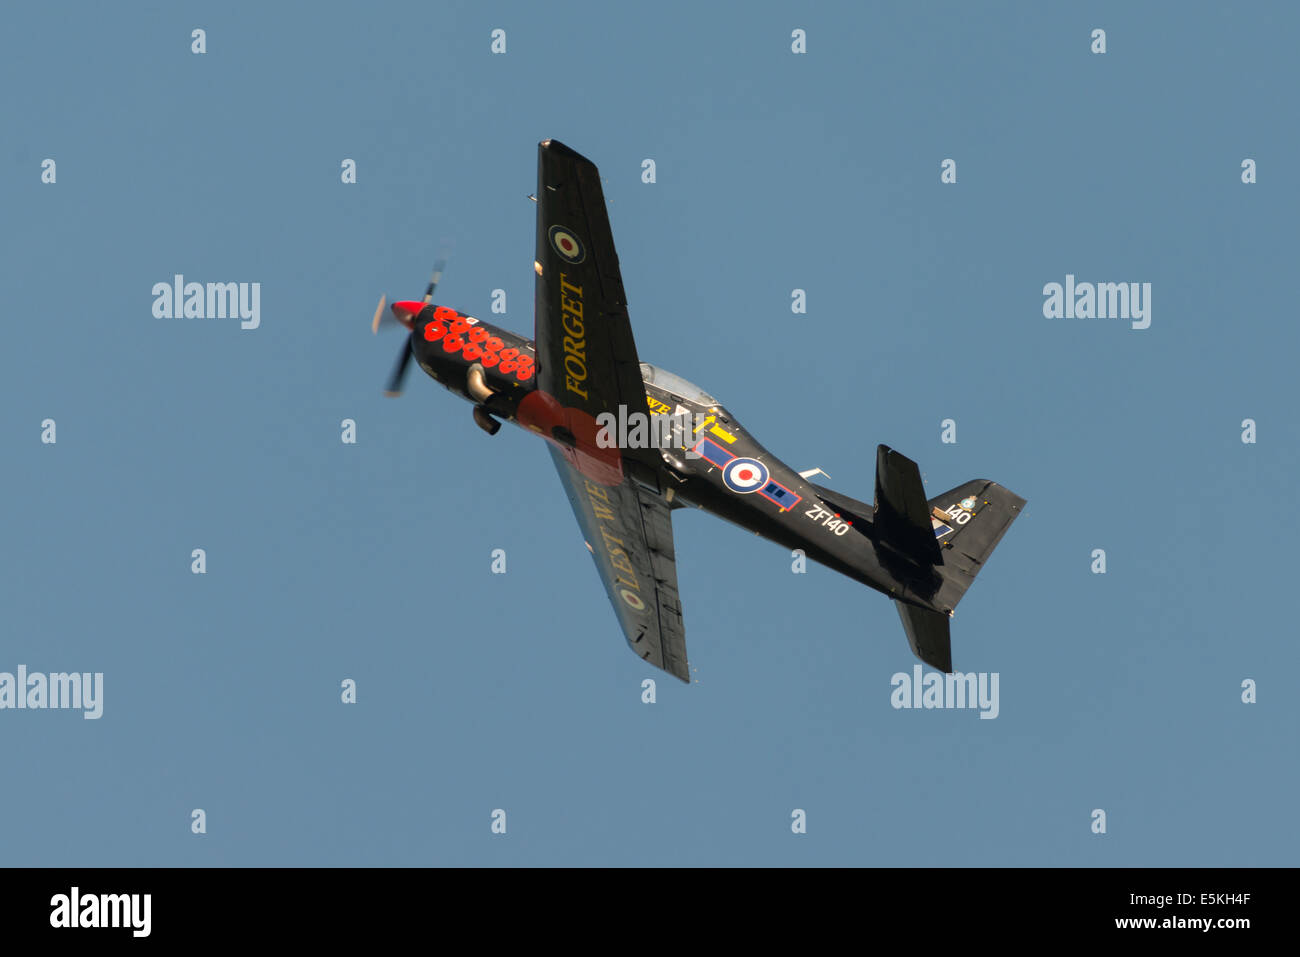 Abingdon, UK - May 4th 2014: RAF Tucano in special paint scheme seen at Abingdon Air Show. Stock Photo